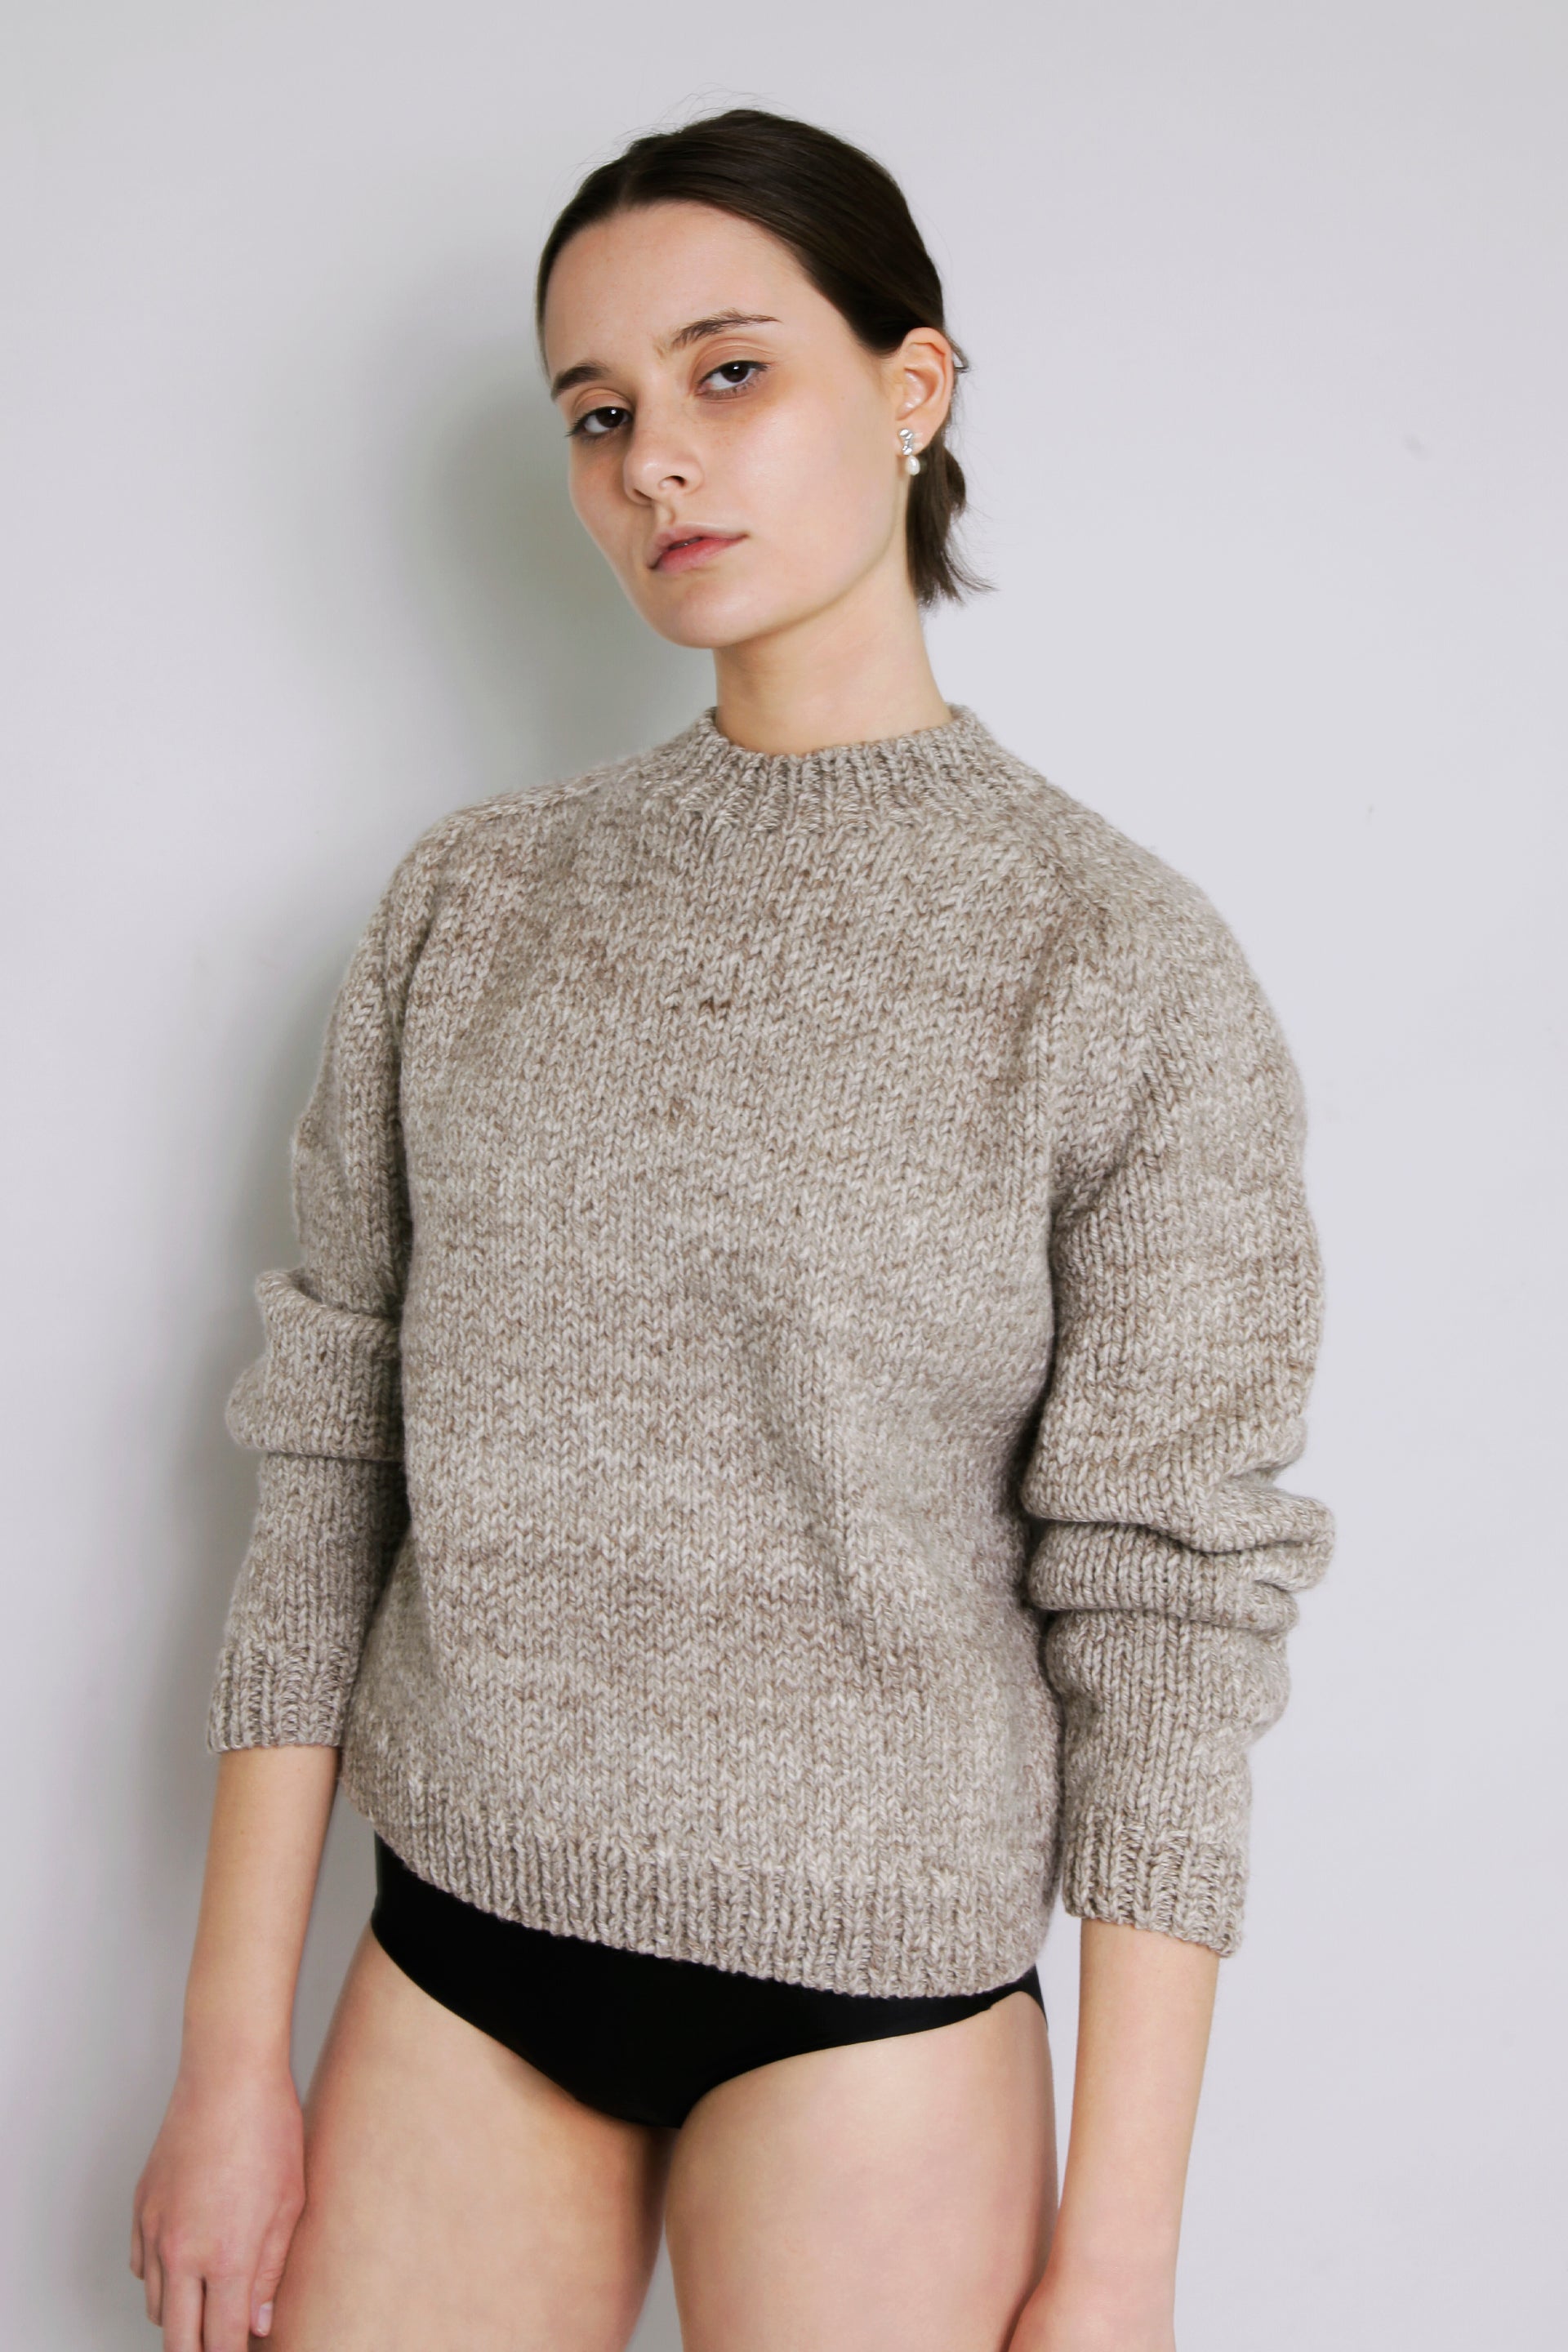 UNDYED, WOOL, HAND-KNITTED, JUMPER, SWEATER, JERSEY, STYLISH, SUSTAINABLE, HAND-CRAFTED, WOMENSWEAR 